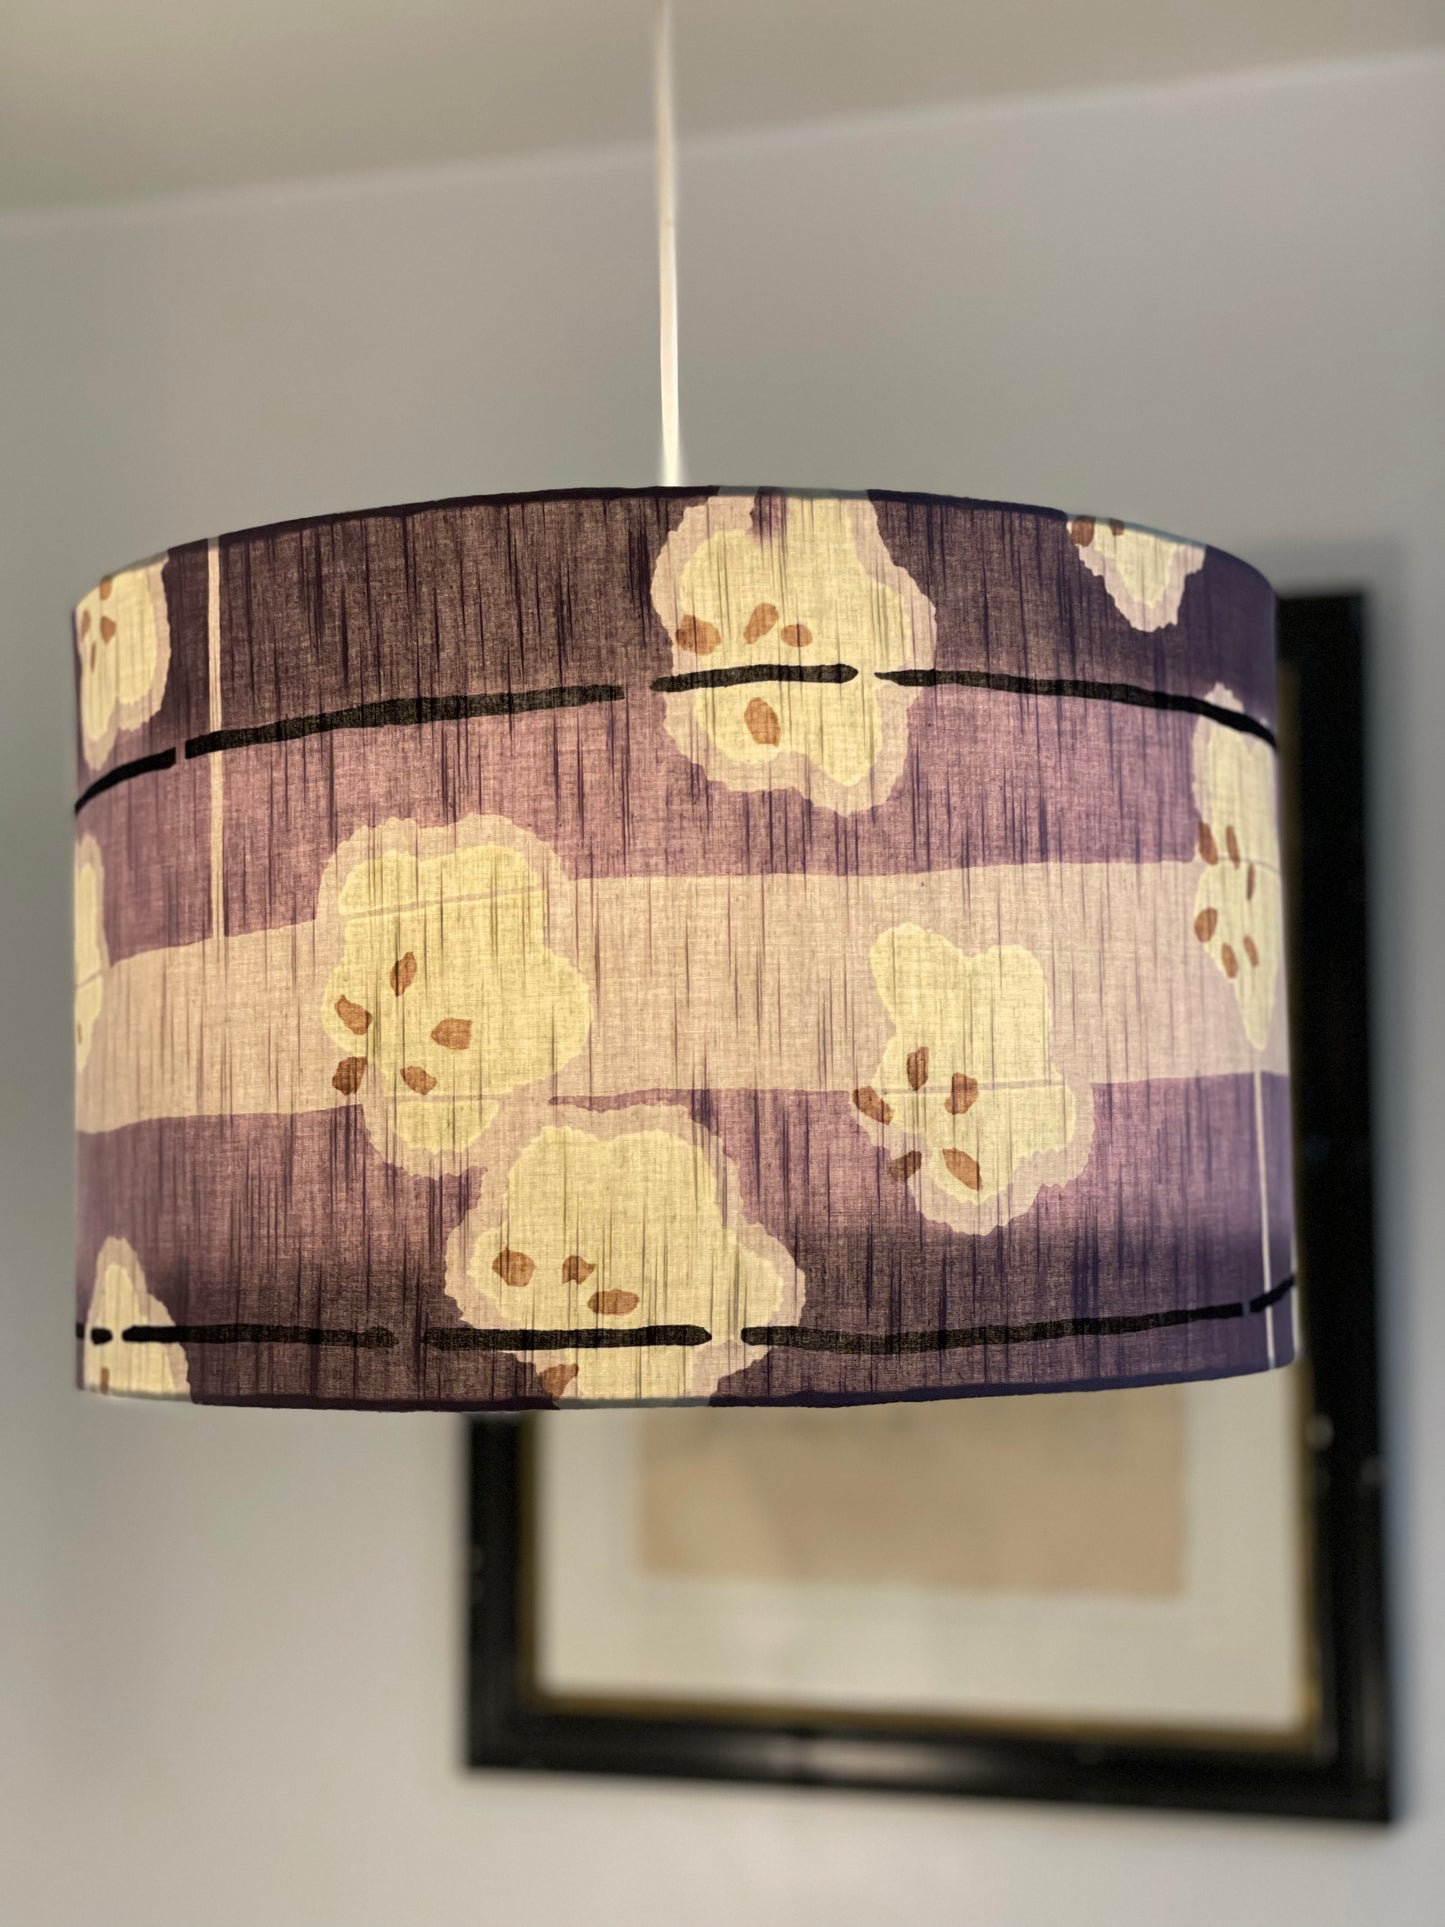 16 Inch Drum Lampshade. Vintage Summer Kimono Fabric. Slightly Textured shades of Lilac, Smoky Purple and Grey.